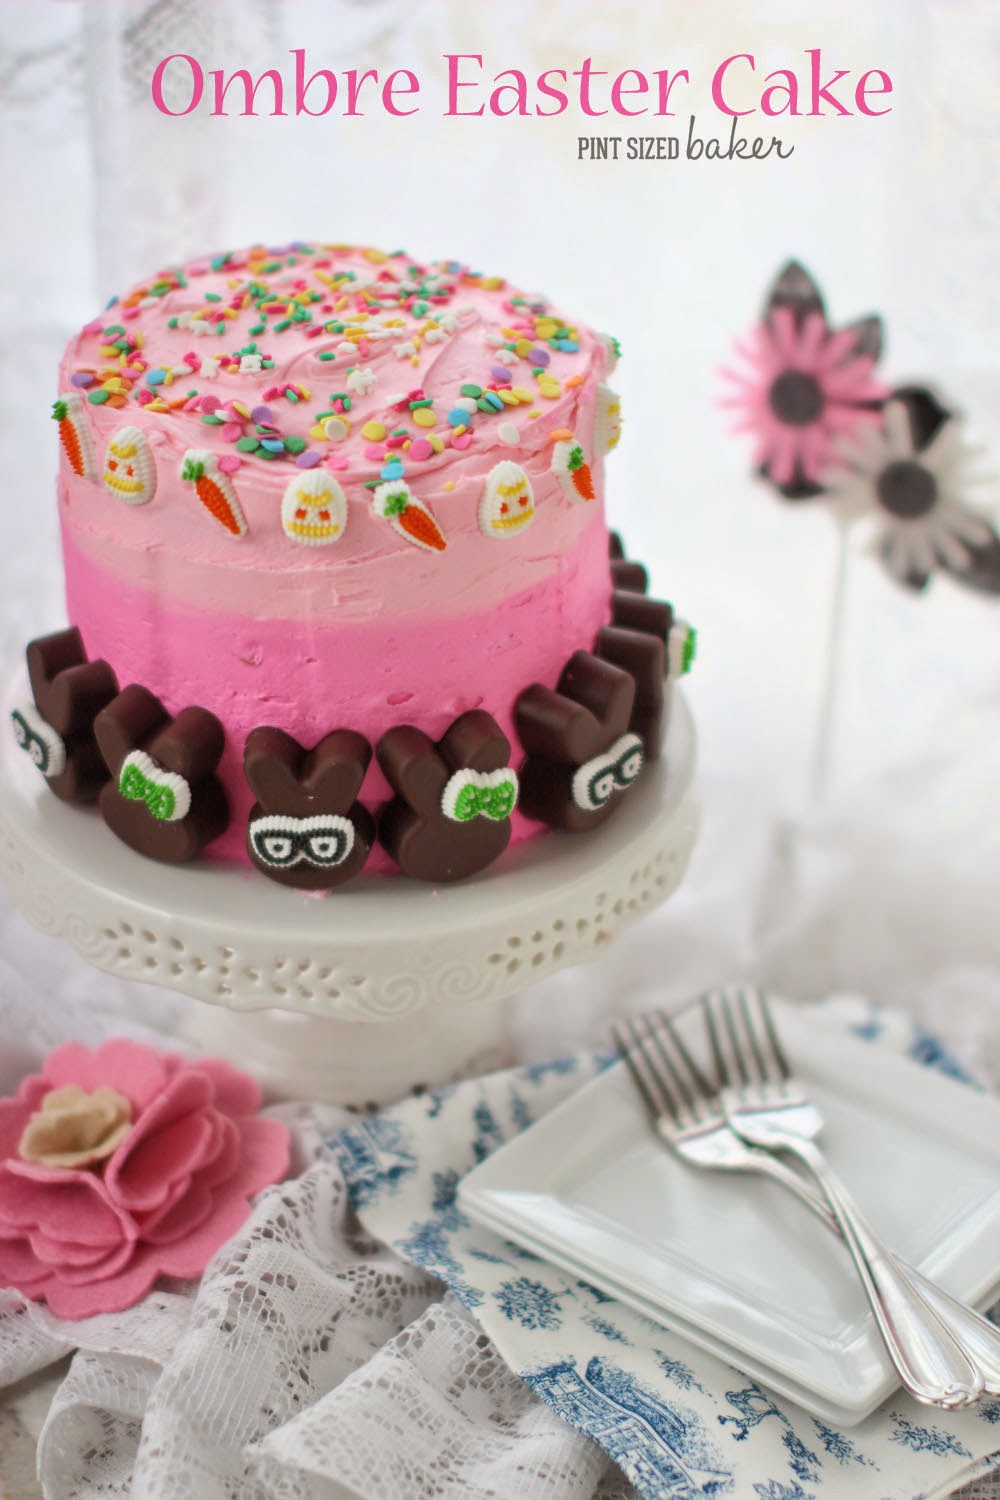 Five layer Ombre Easter Cake with pink ombre frosting and chocolate bunnies and Spring sprinkles.